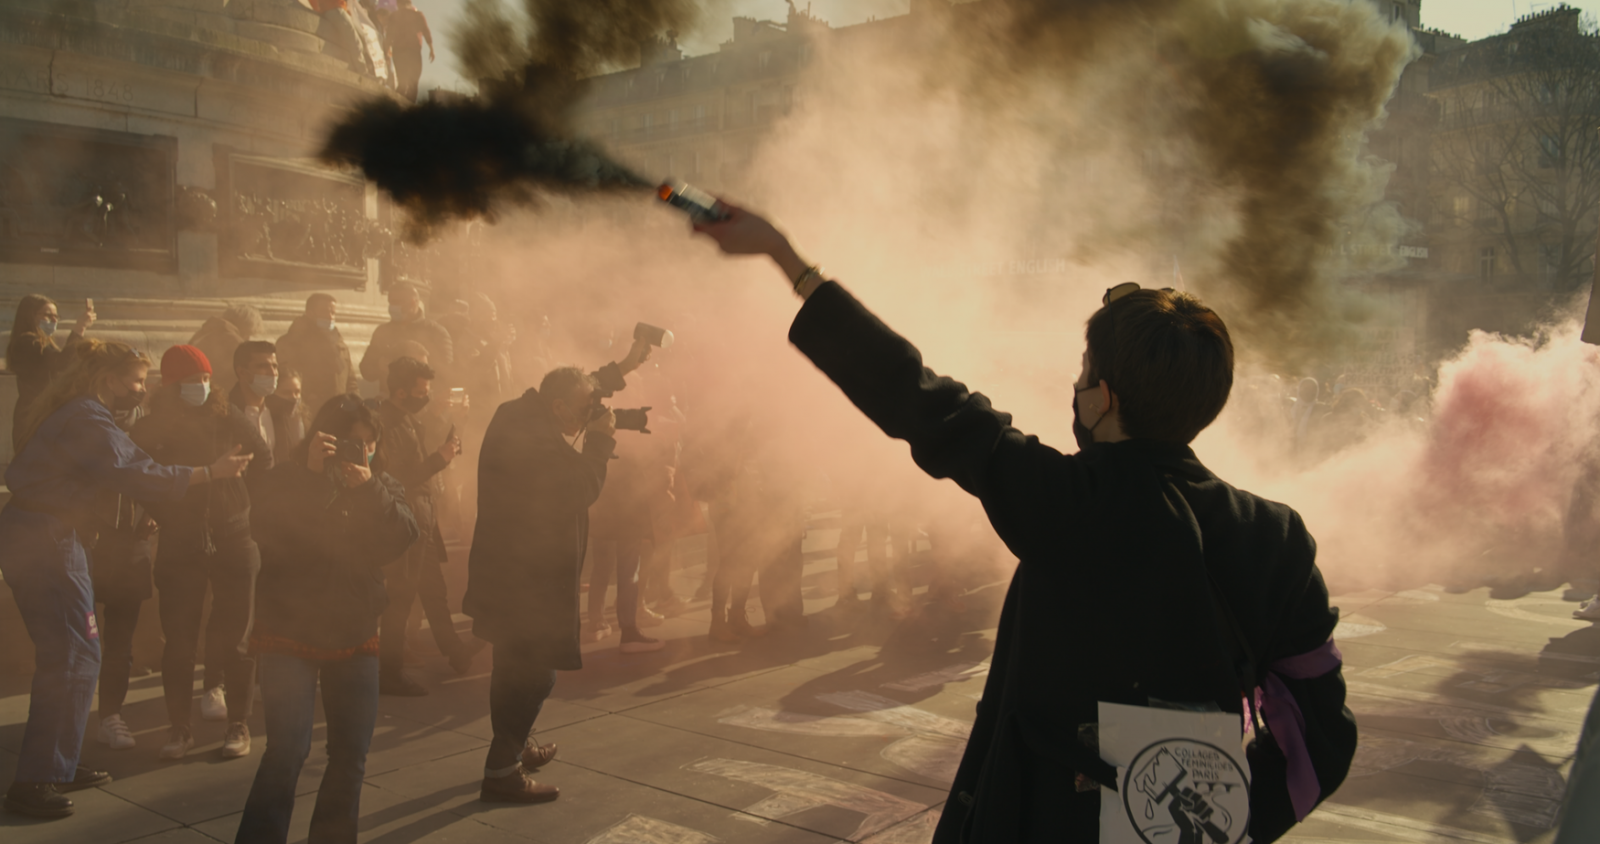 Smoke covers a group of people, many are wearing masks and have camera. The back of a protester can be seen in the foreground, waving a smoke device. 